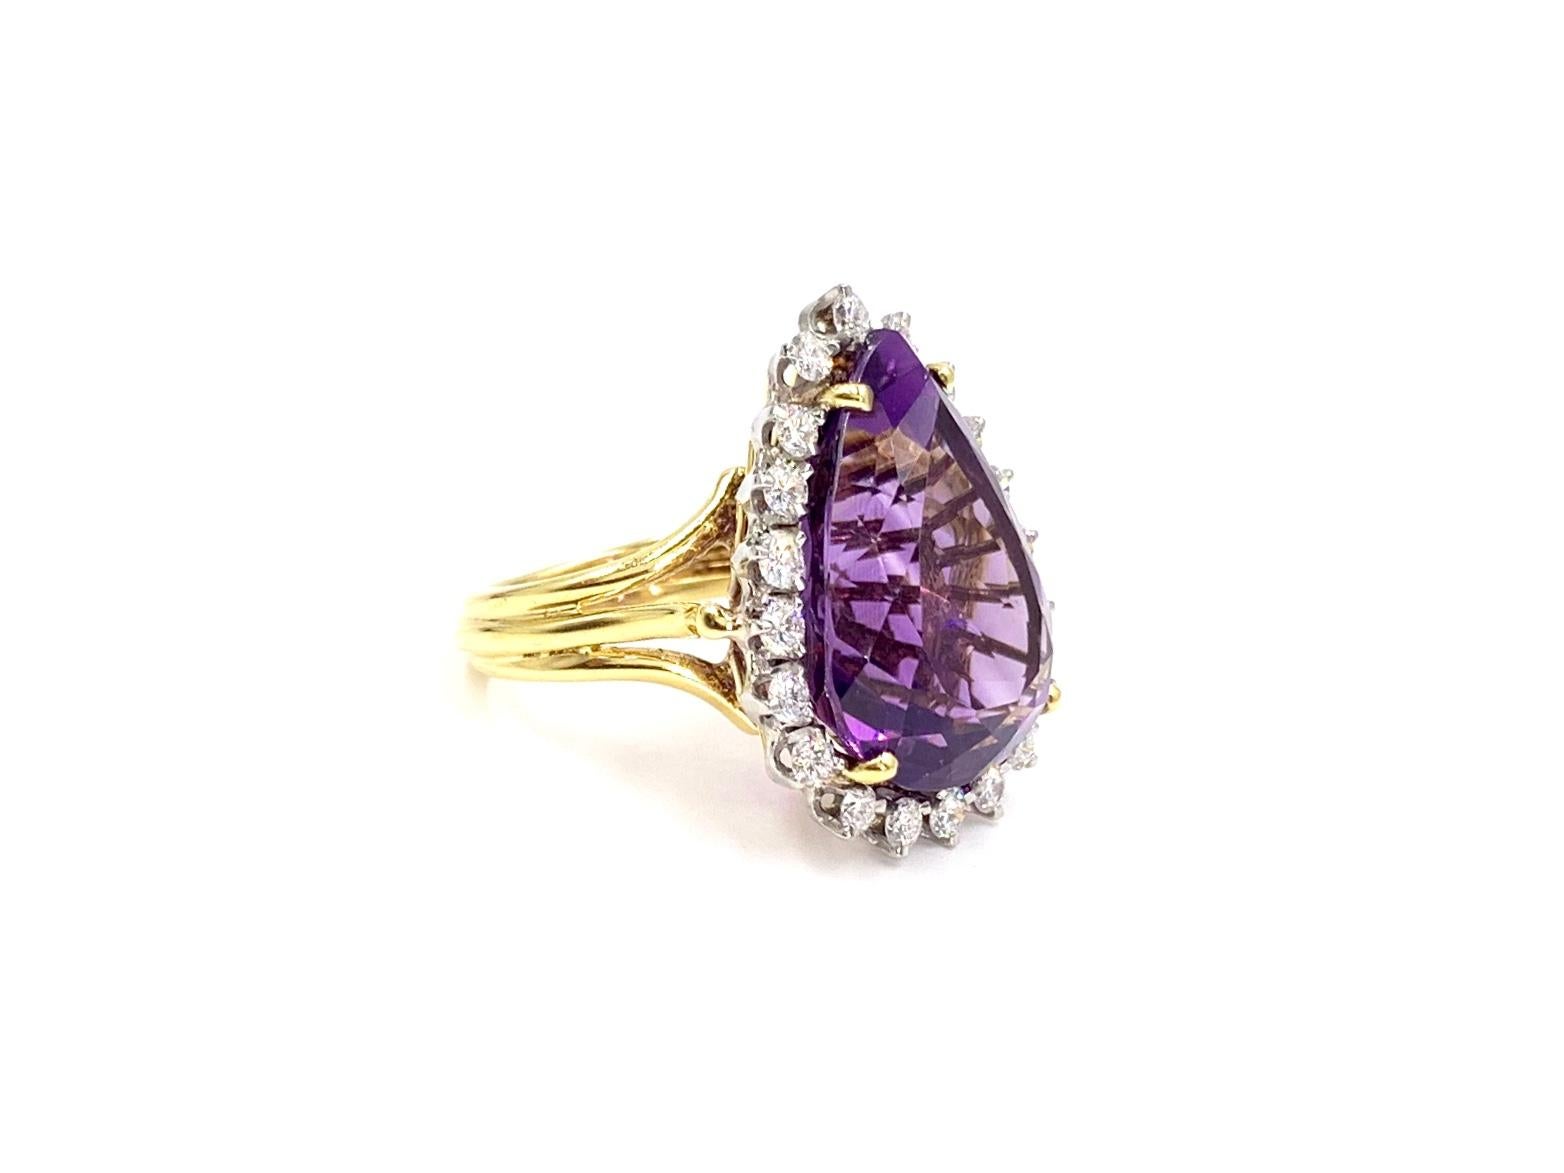 An absolute stunner. This 18 karat two tone cocktail ring features a gorgeous, well saturated faceted pear shape amethyst weighing approximately 17 carats surrounded by 20 round brilliant white diamonds at approximately 1.25 carats total weight.